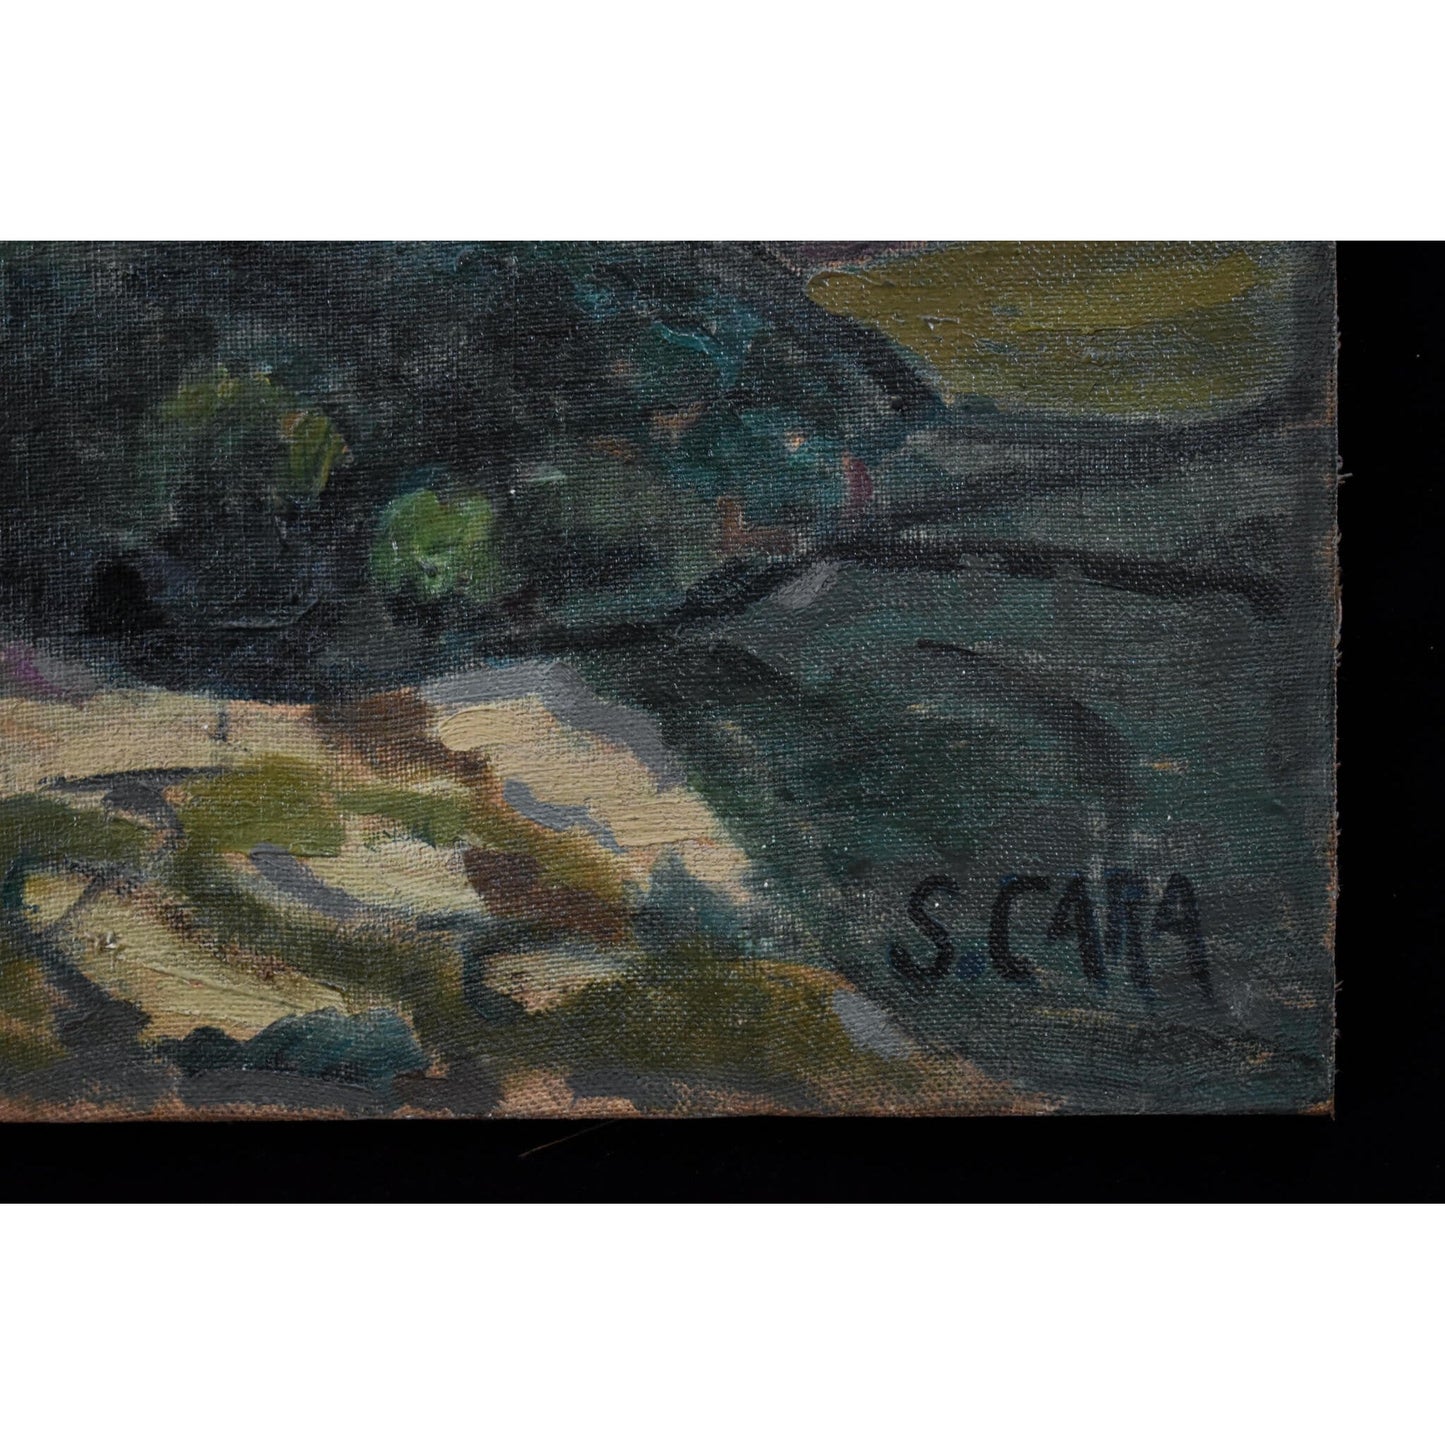 Vintage landscape oil painting village view circa 1945 by Stephane Cara for sale at Winckelmann Gallery